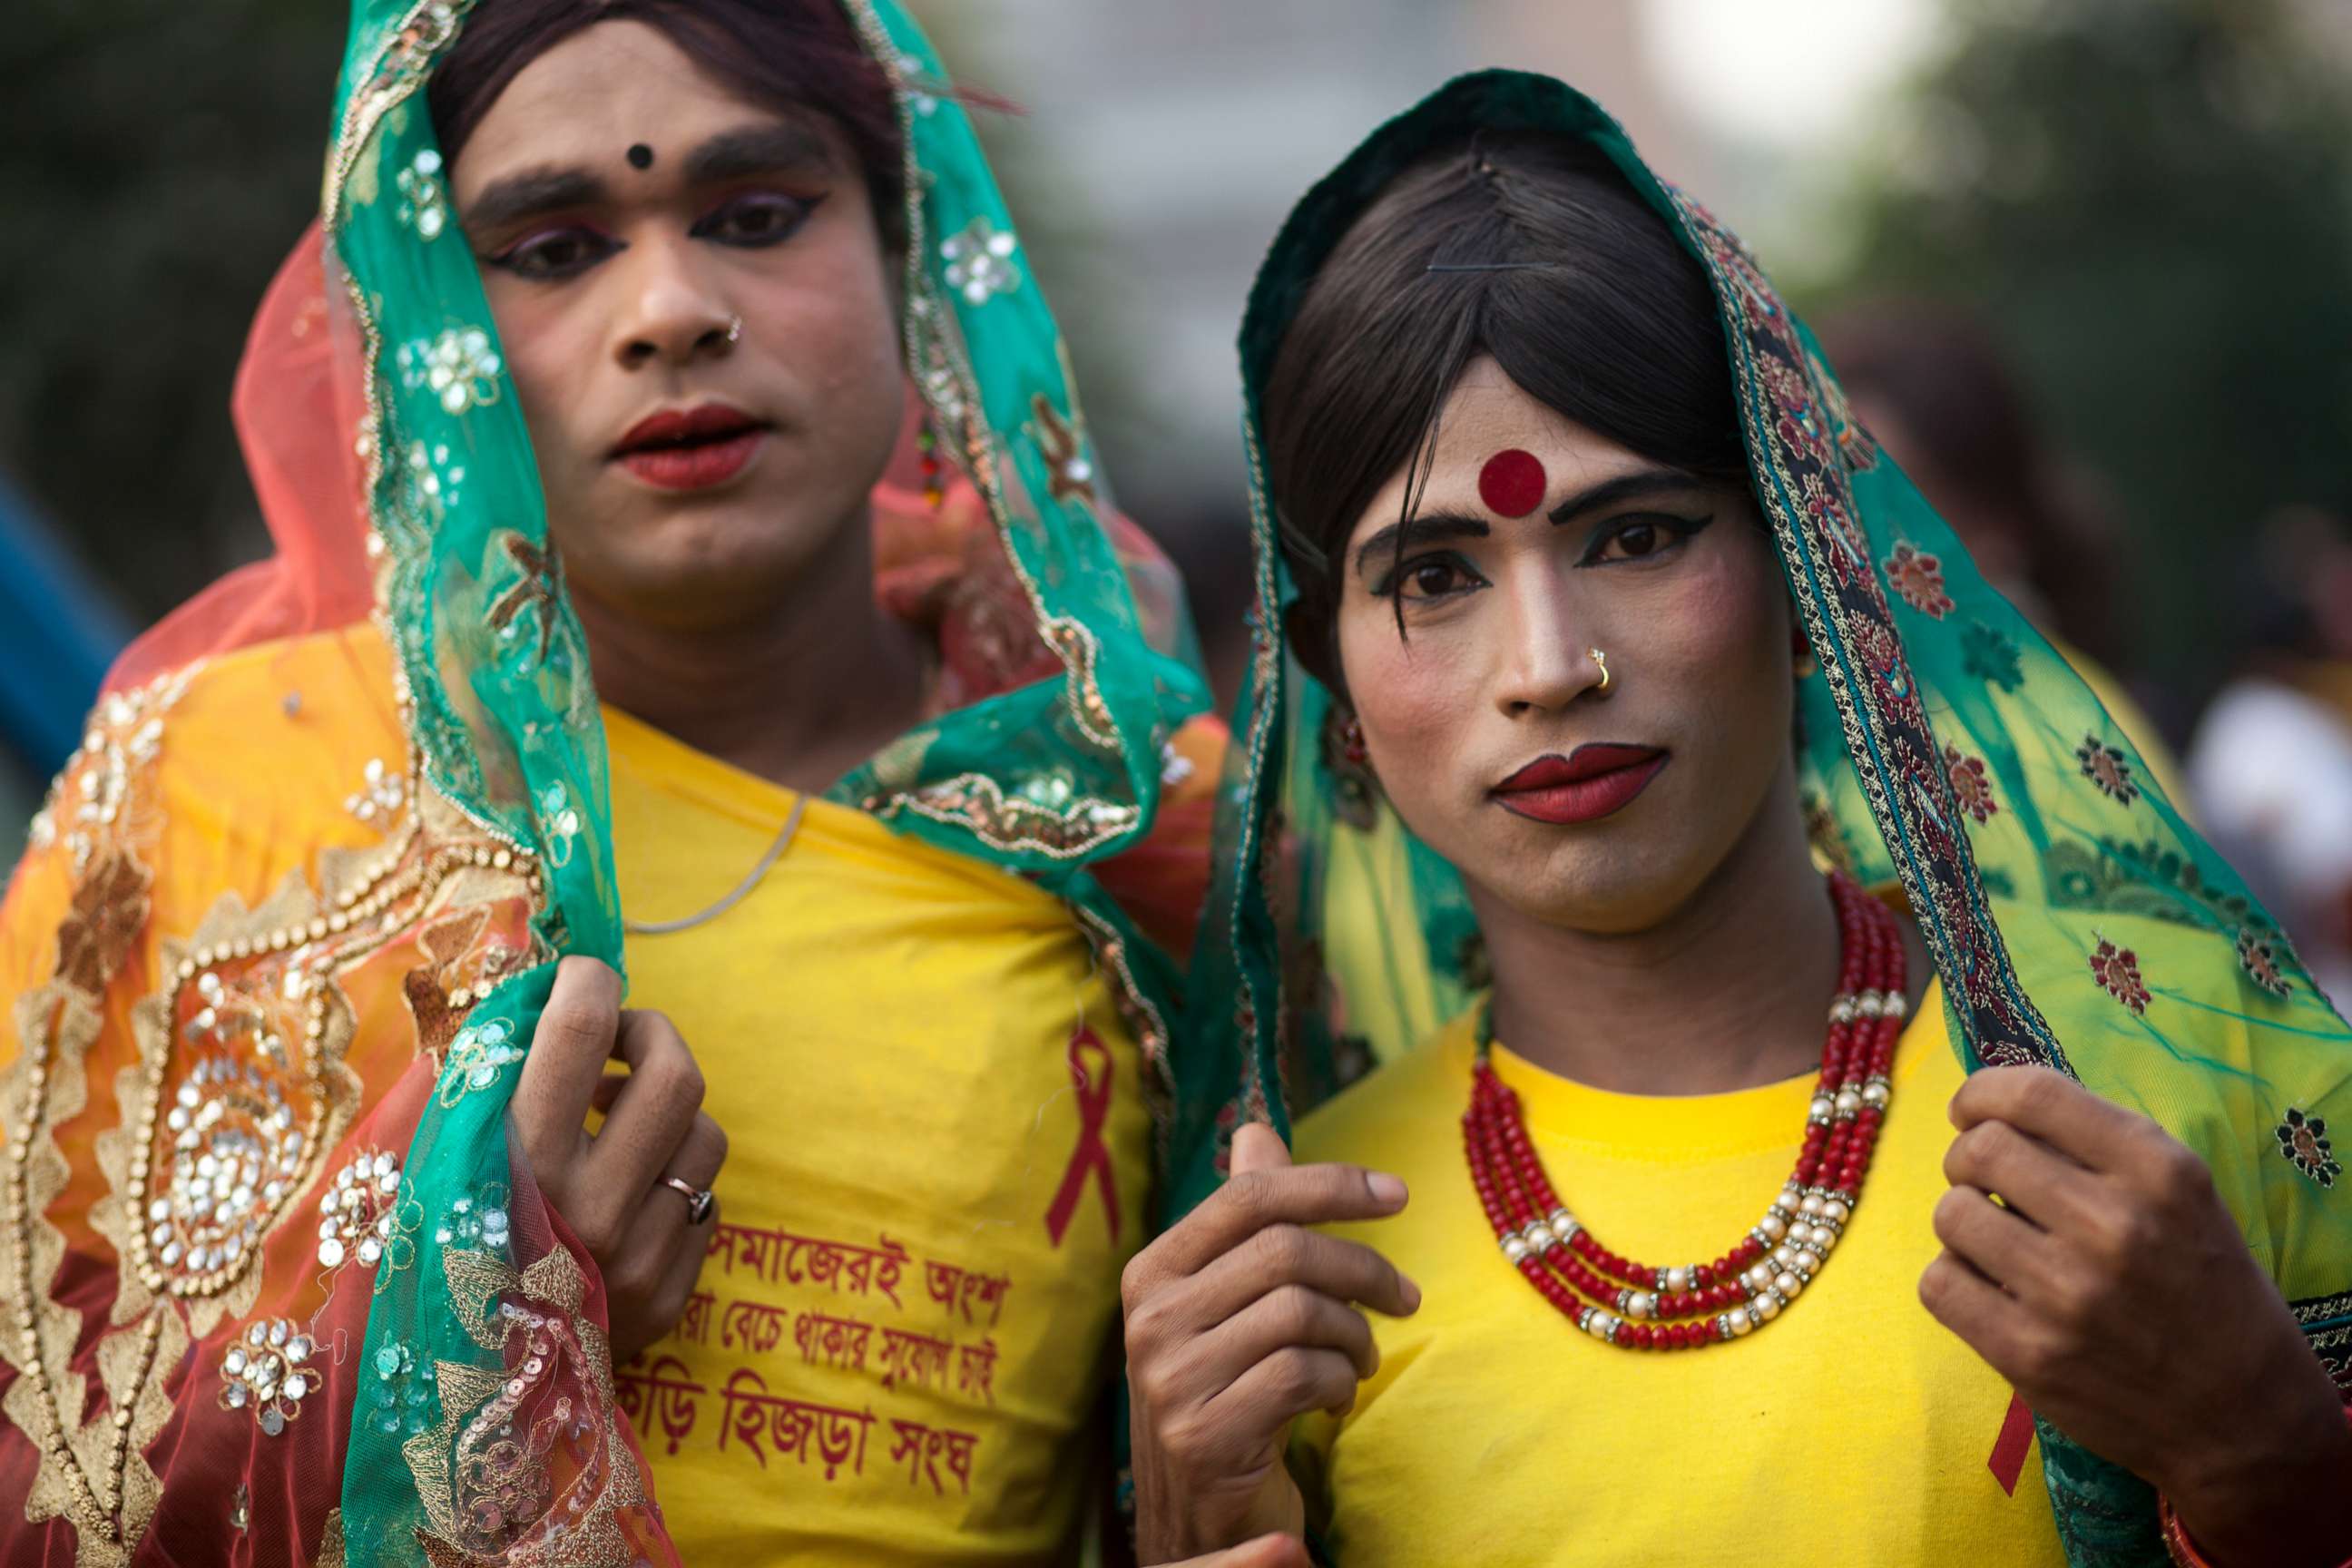 PHOTO: Social workers form and transsexuals made rally in Dhaka to aware people from HIV/AIDS on the occasion of 'World AIDS Day' on Dec. 1, 2014.